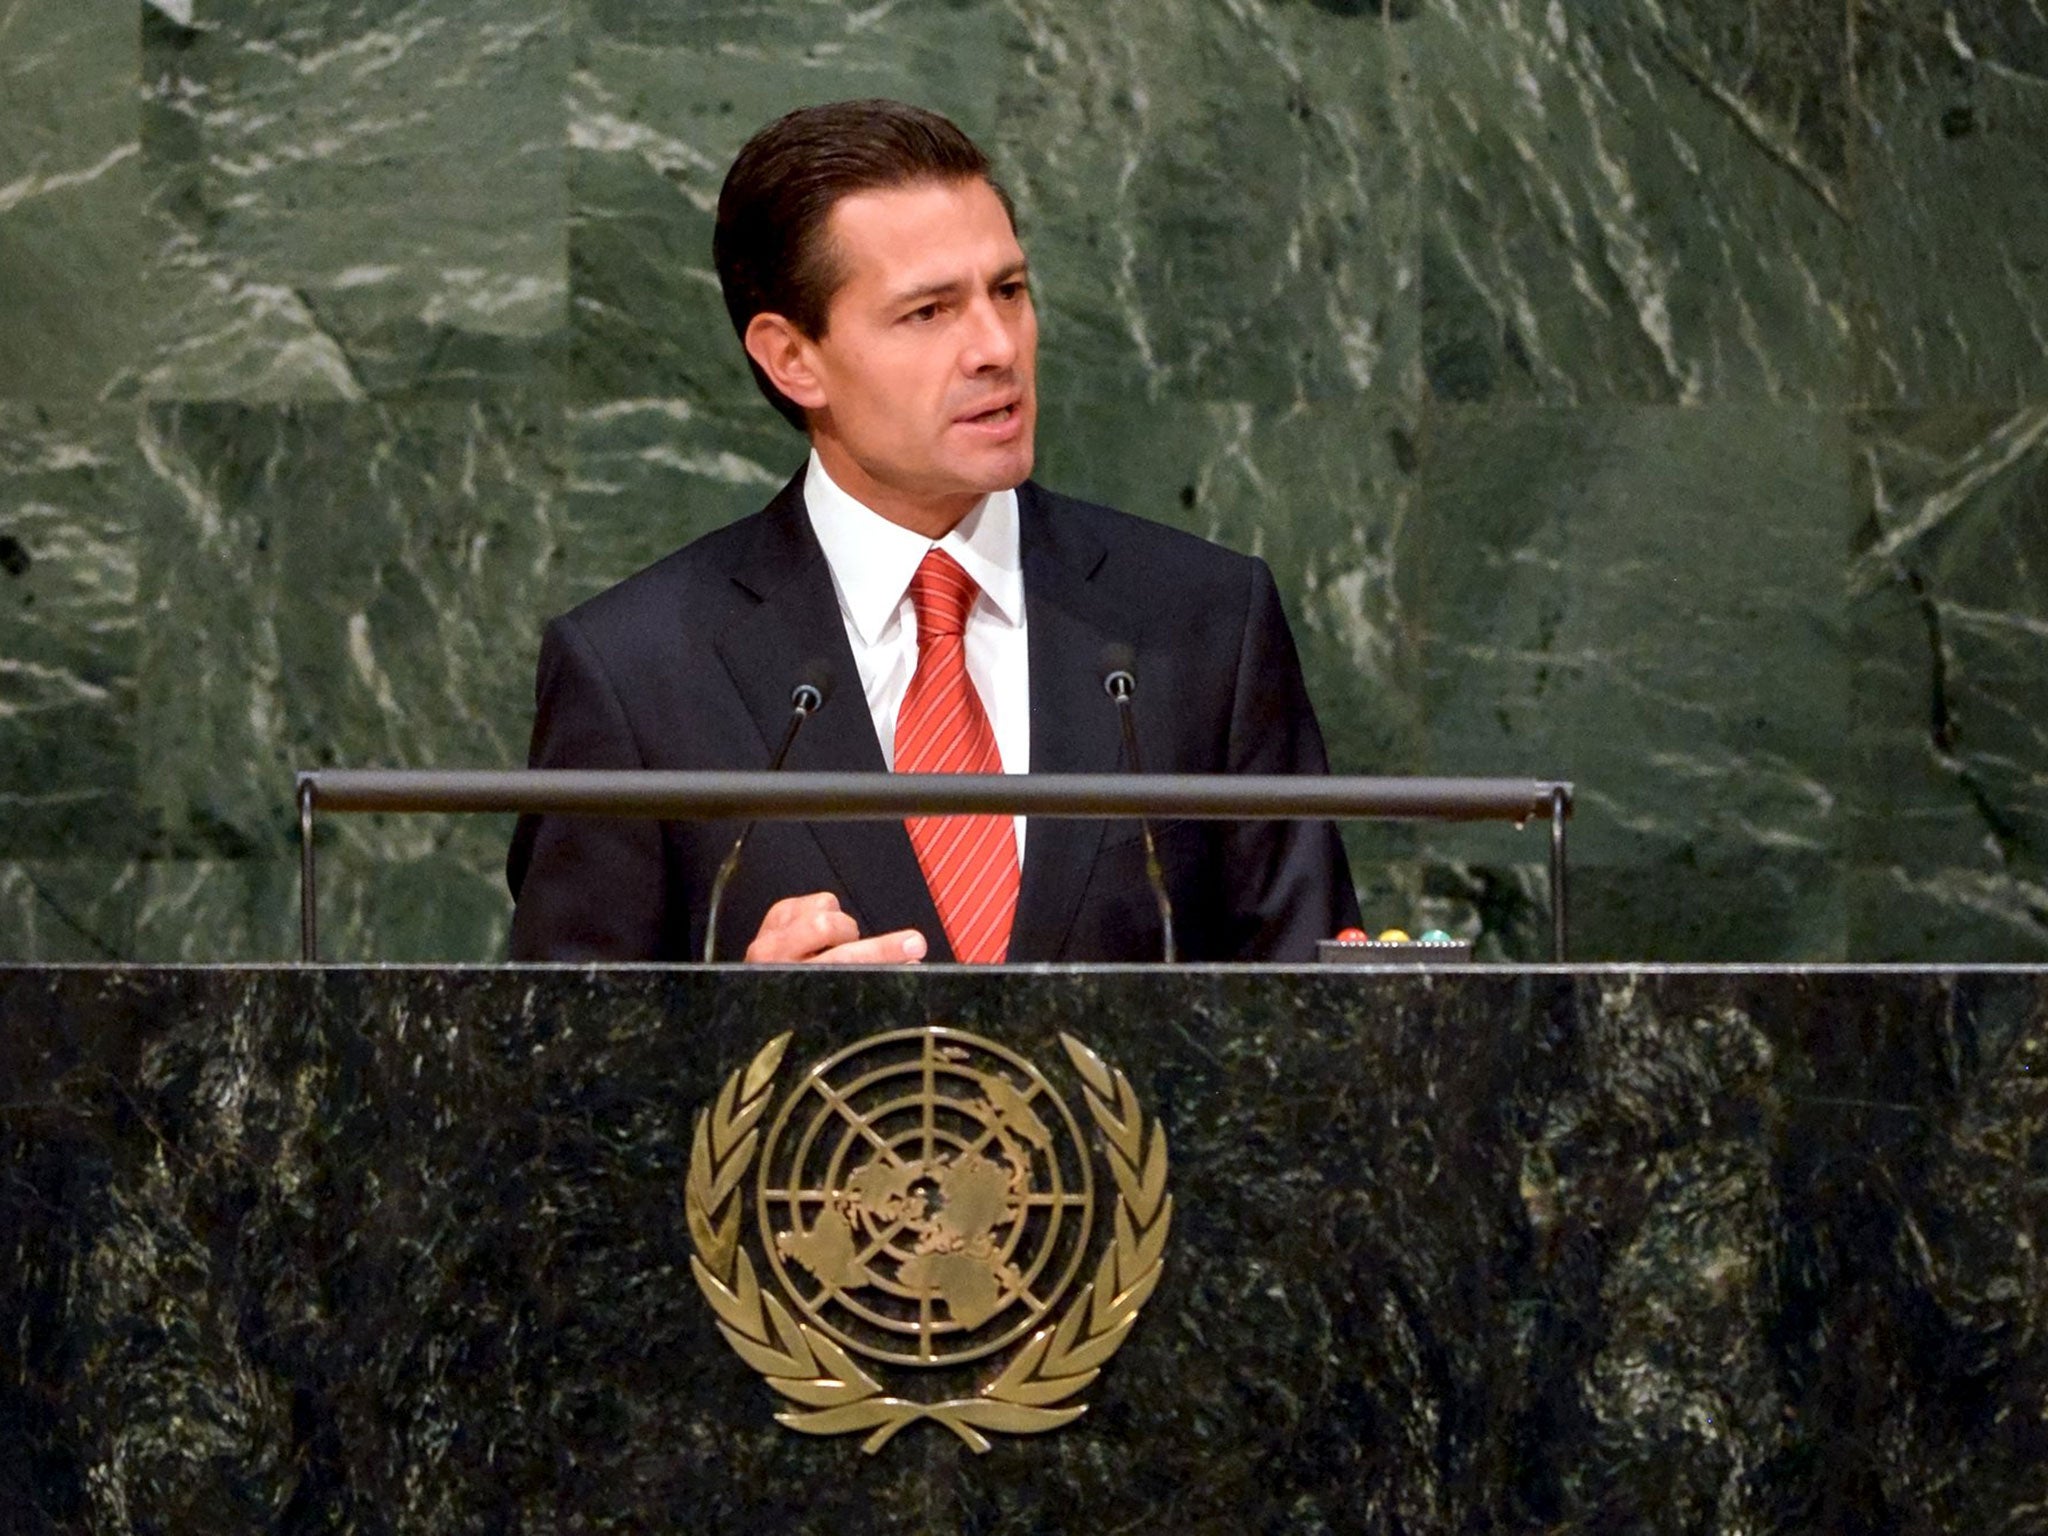 Mexican President Enrique Pena Nieto confirmed that he had made the invitation